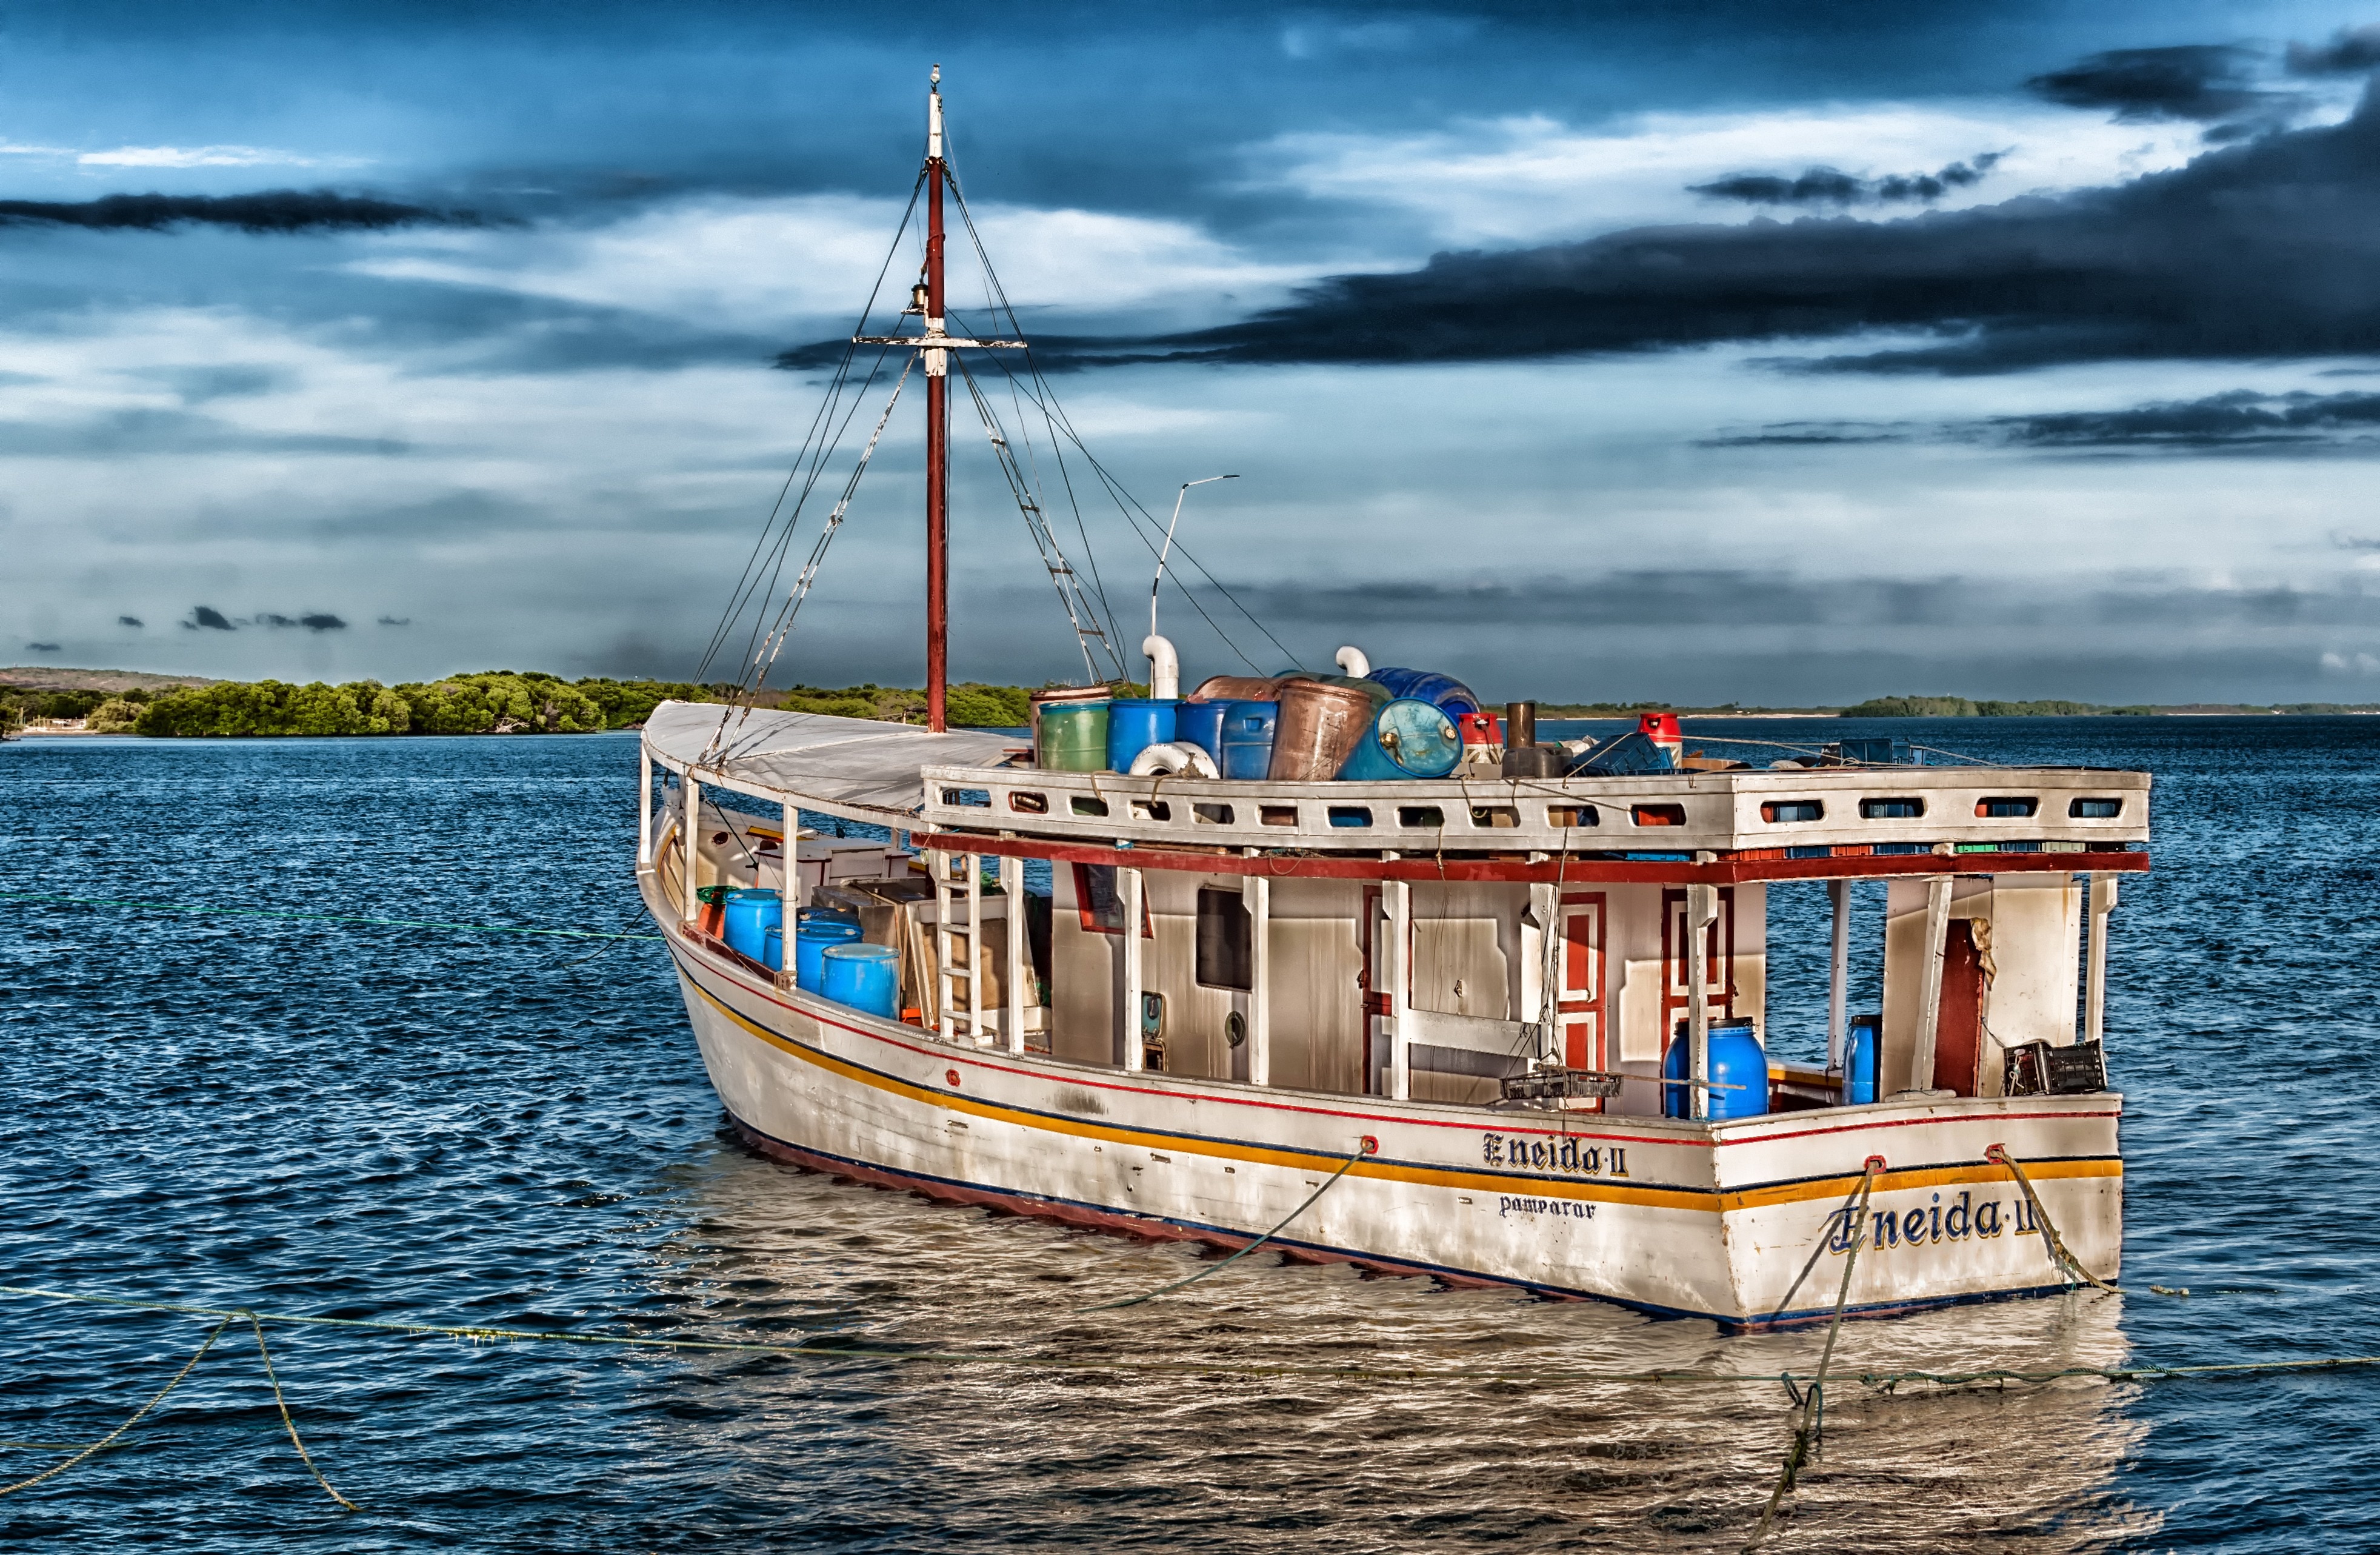 Bay, Boat, Hdr, Chacacare, Water, Harbor, sea, cloud - sky